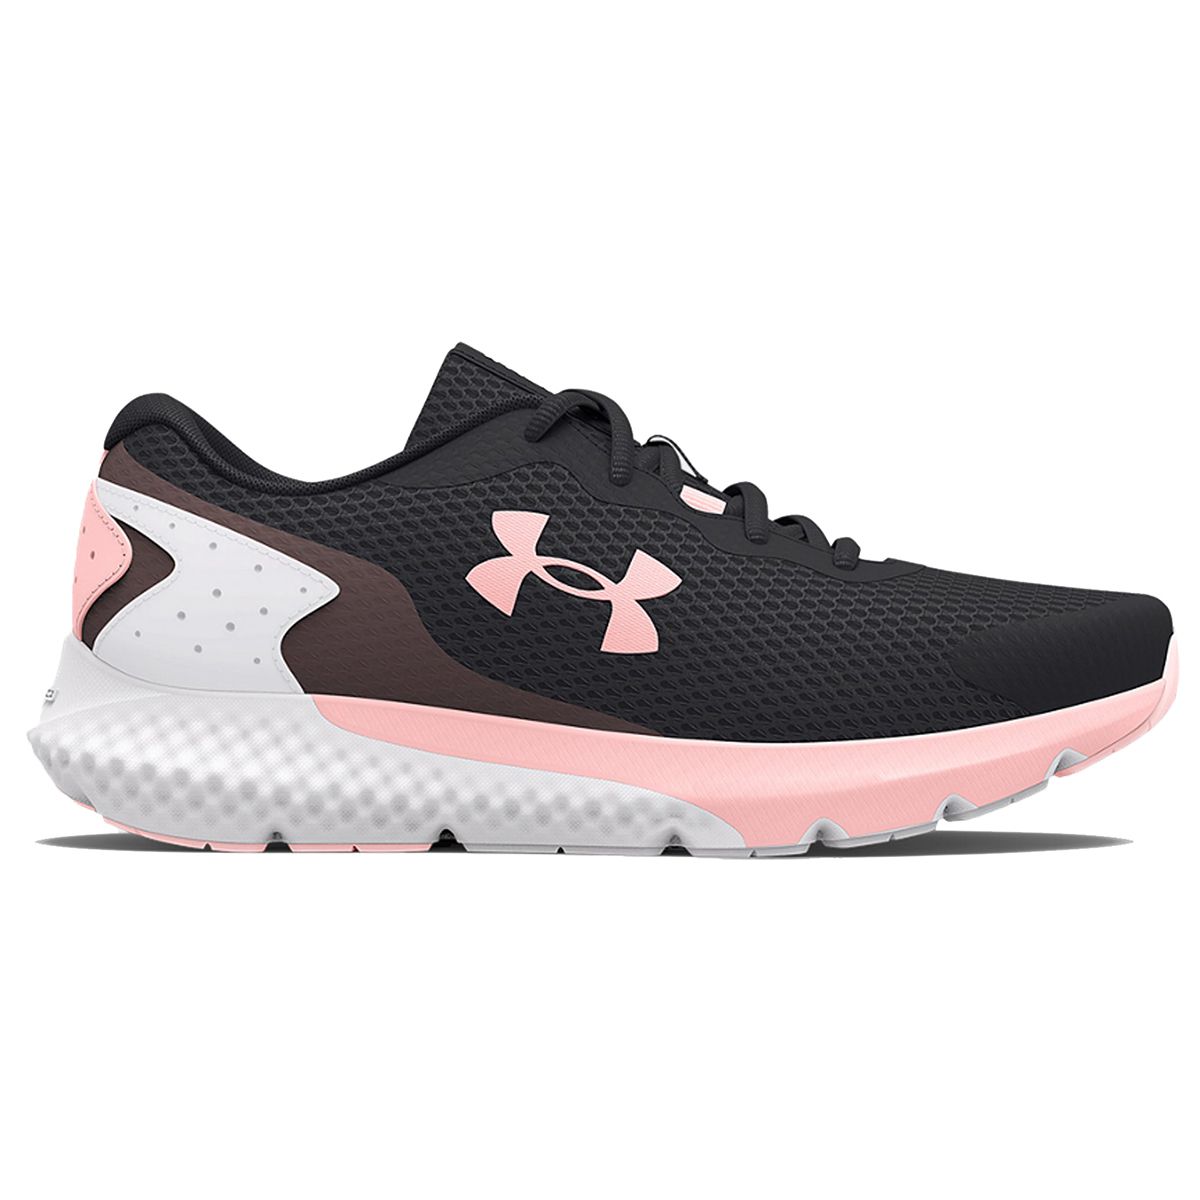 Under Armour Charged Rogue 3 Girls Running Shoes (GS) 302500